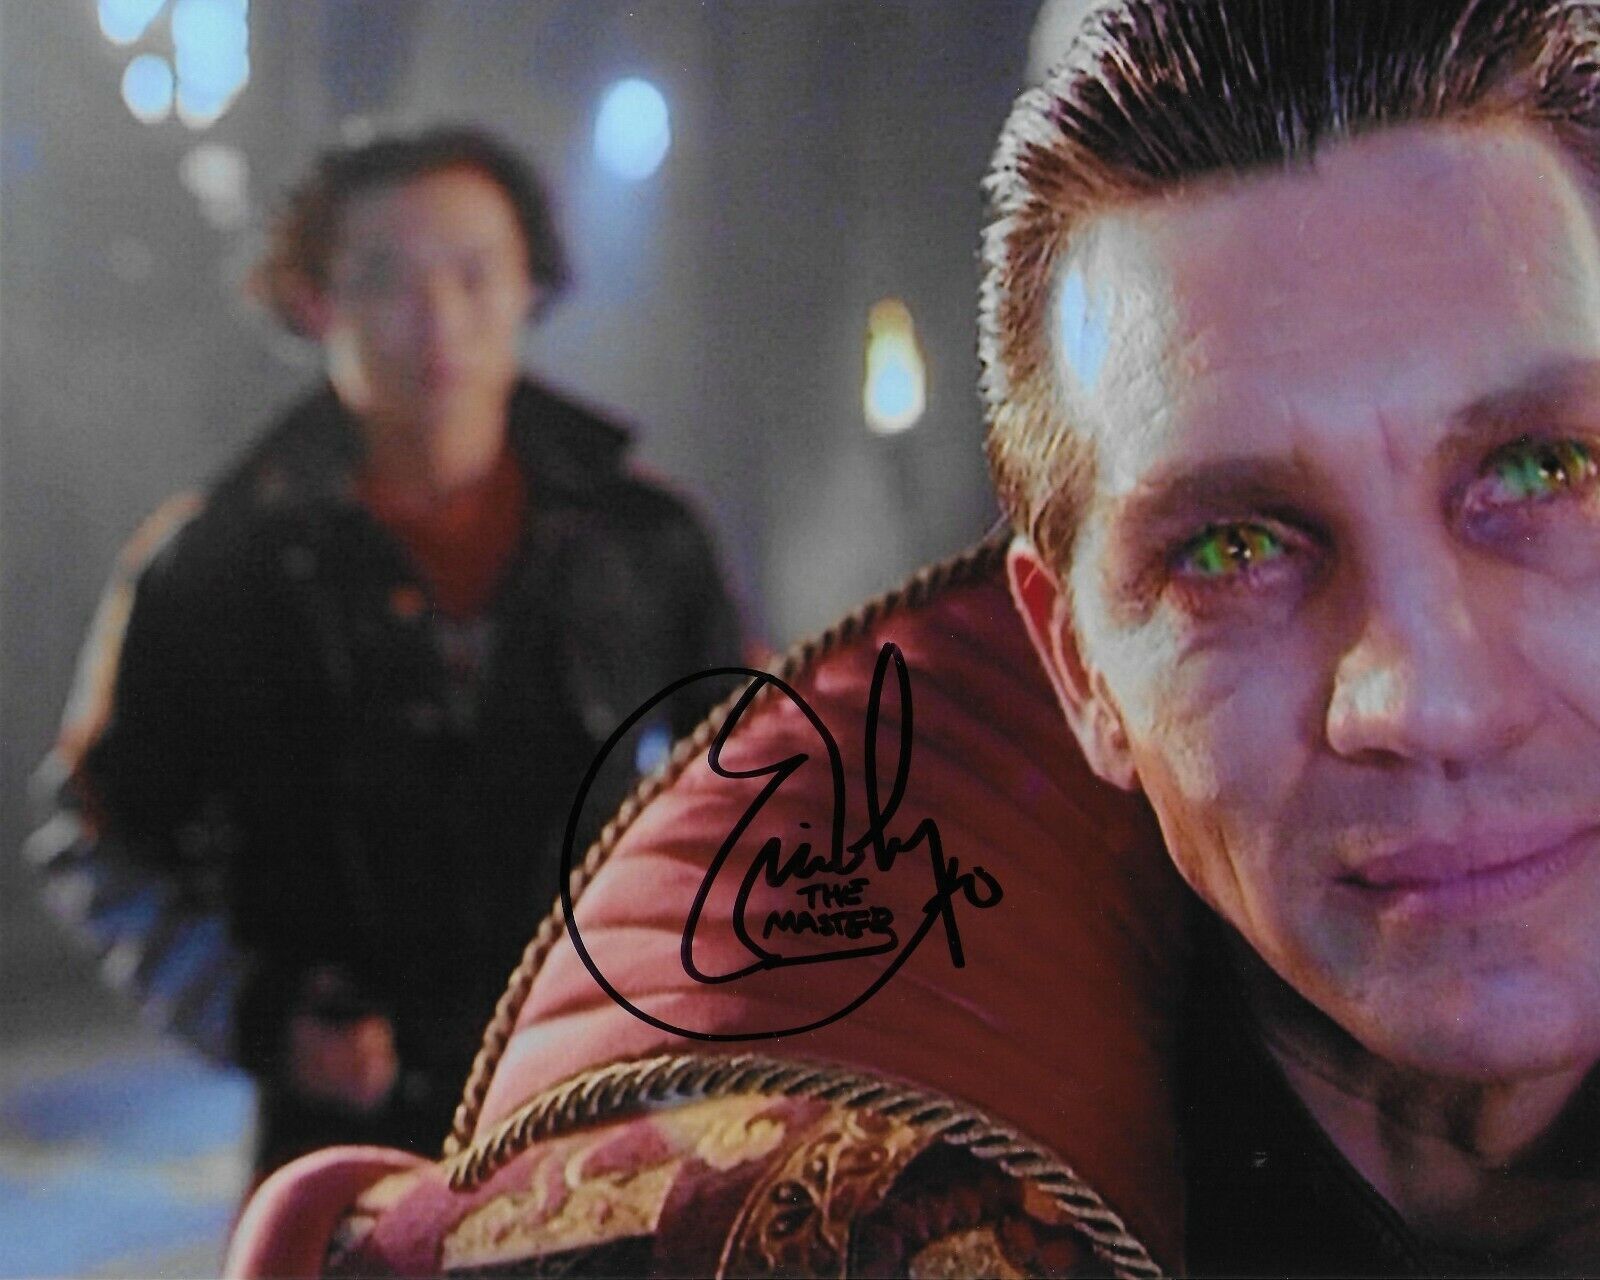 Eric Roberts Doctor Who Original Signed 8x10 Photo Poster painting #2 At Hollywoodshow RARE!!